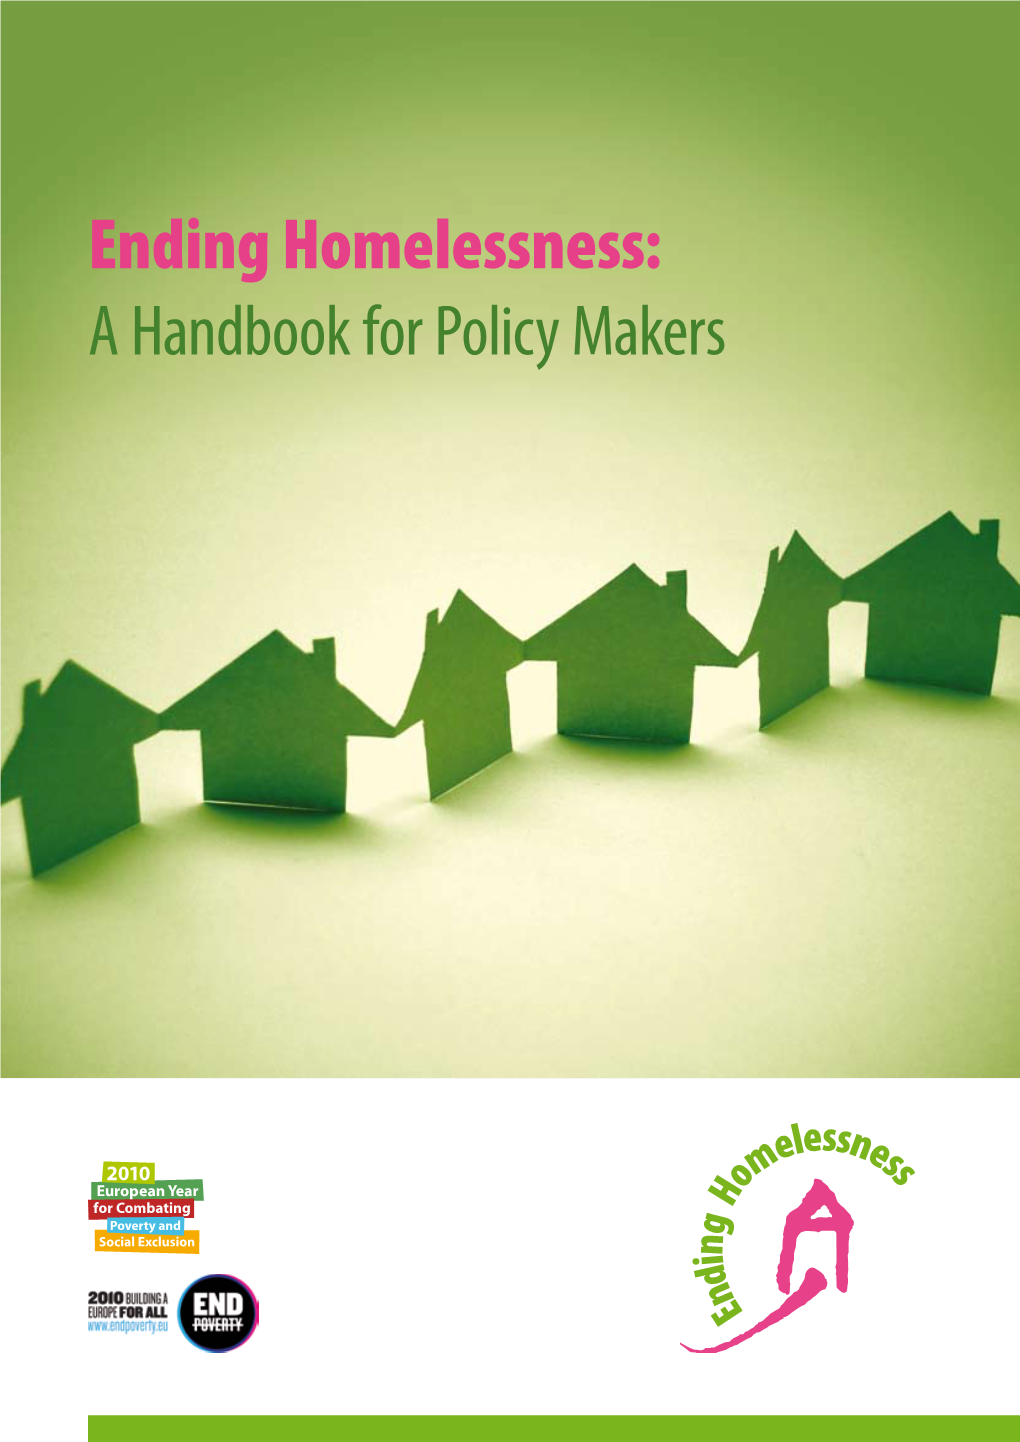 Ending Homelessness: a Handbook for Policy Makers